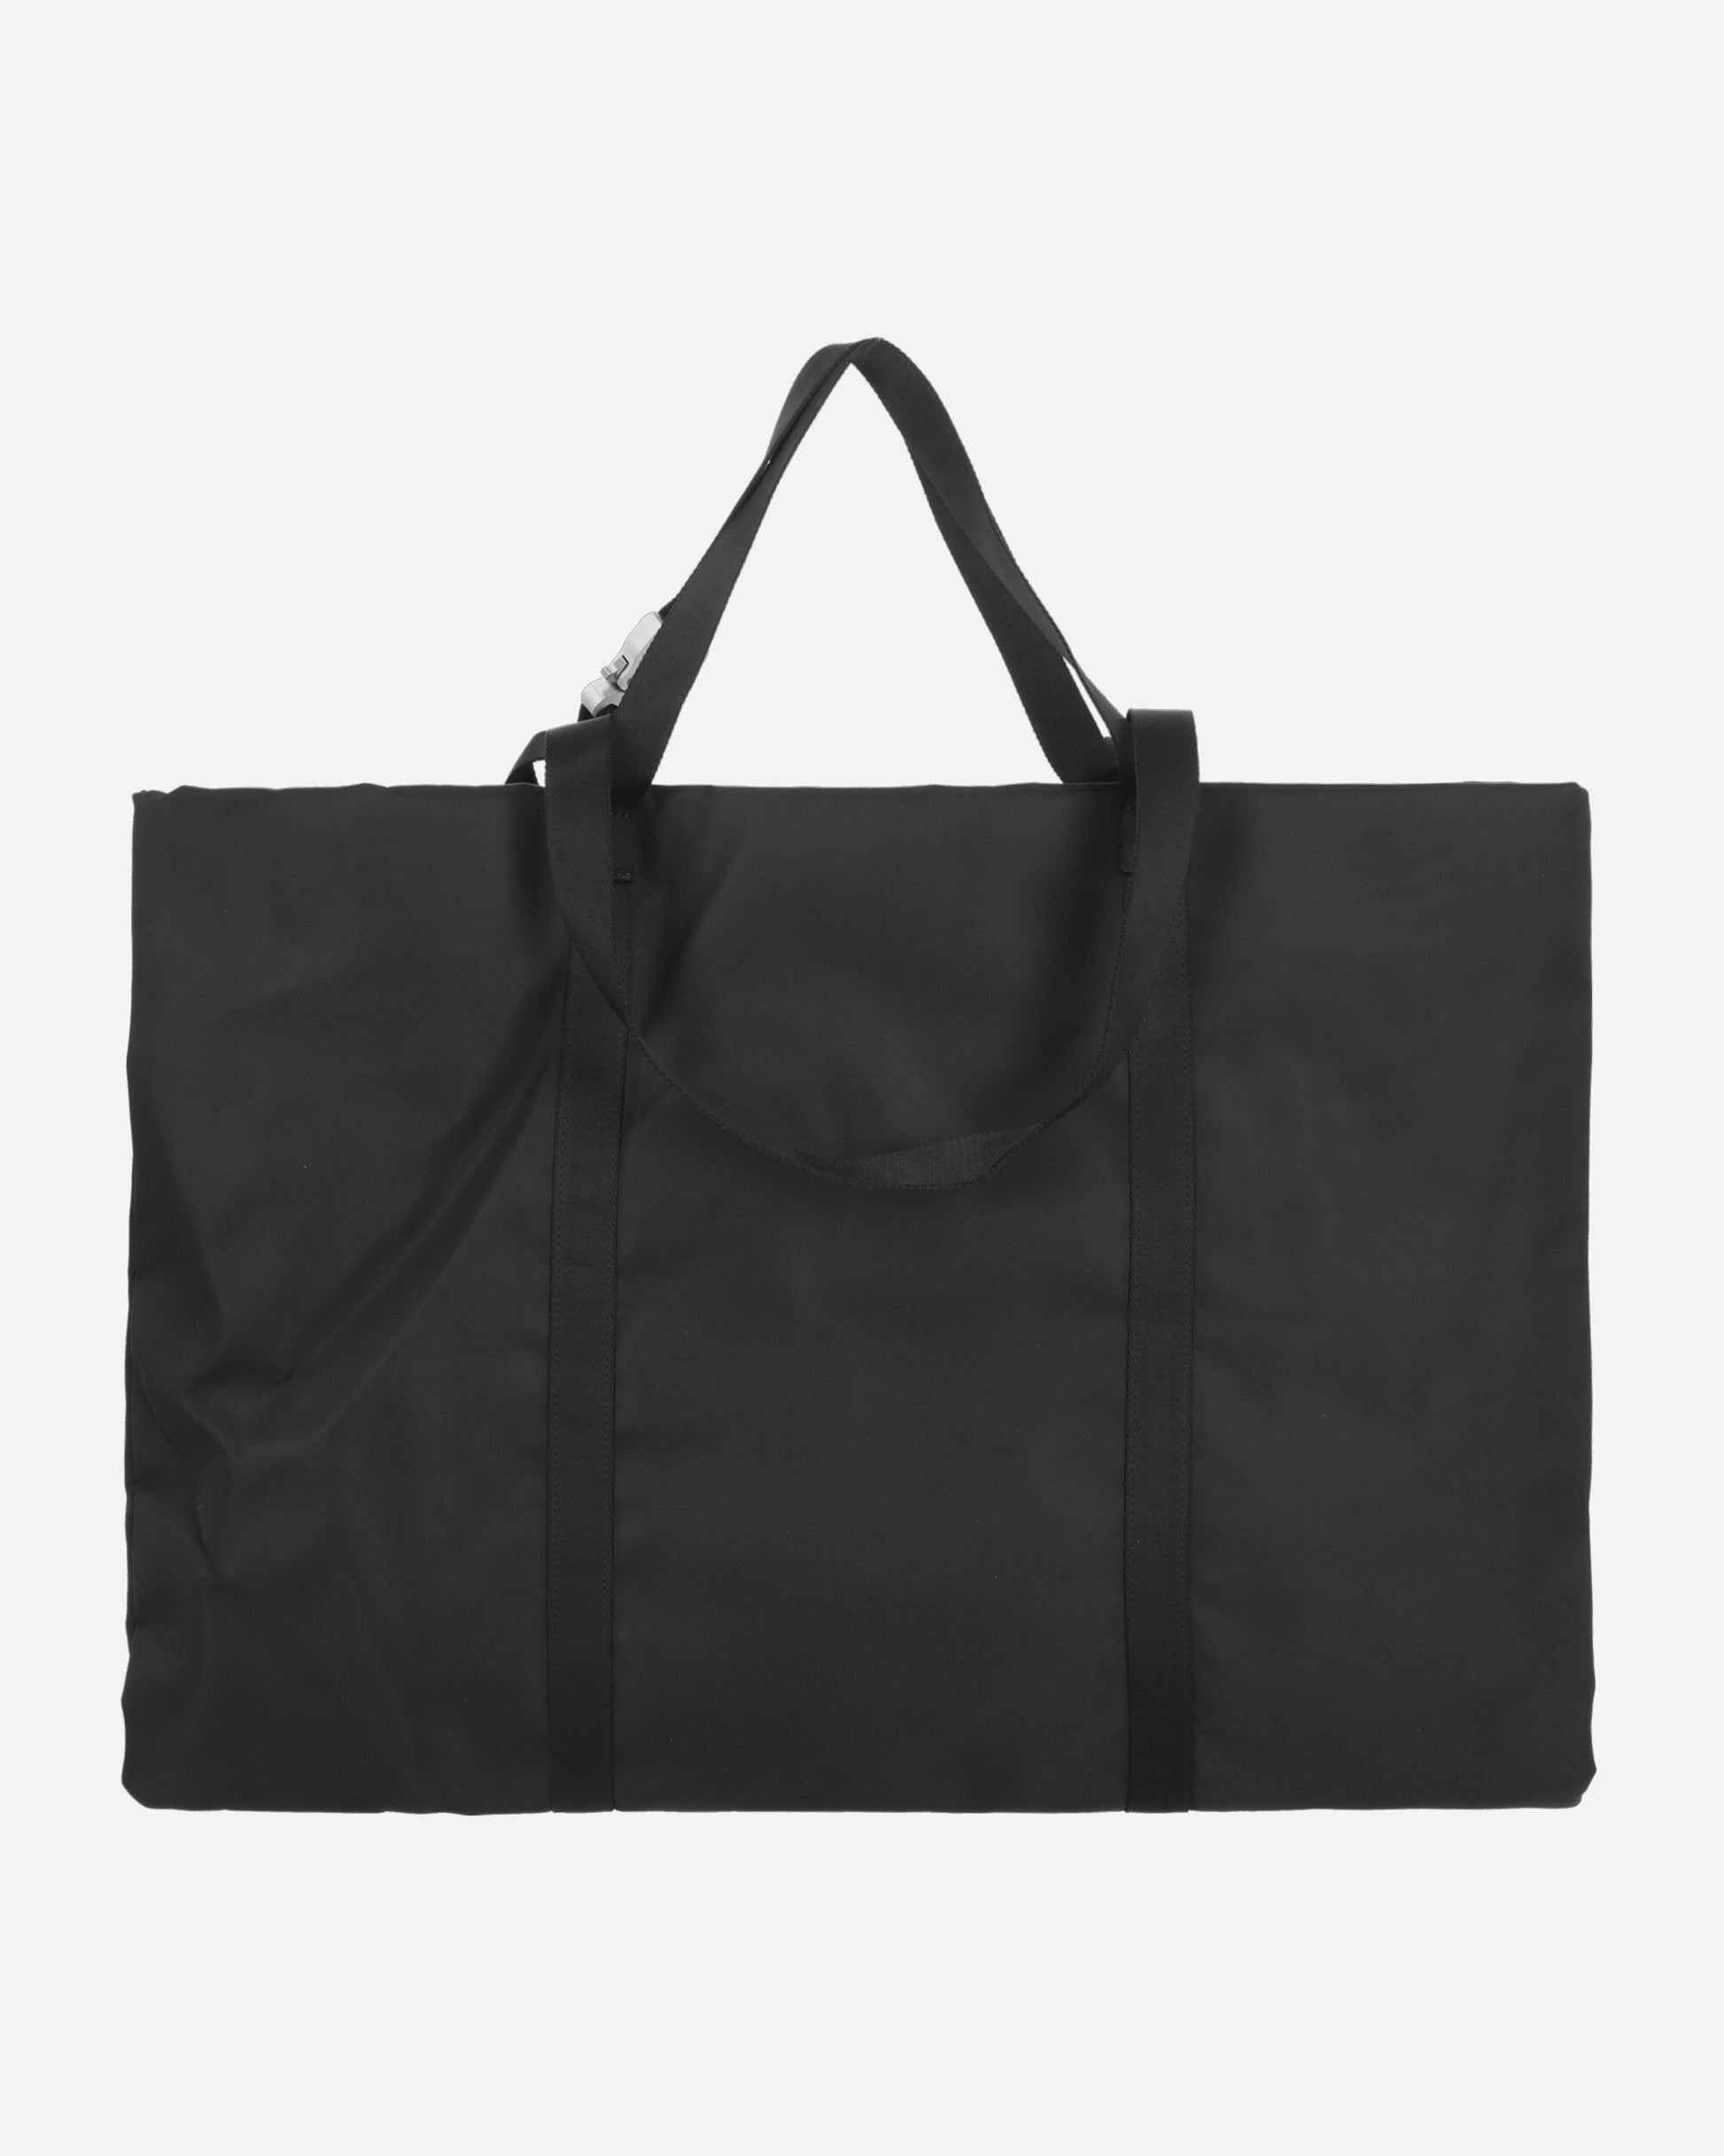 1017 ALYX 9SM Big Puffer Tote Black Bags and Backpacks Tote Bags AAUTB0027FA01 BLK0002